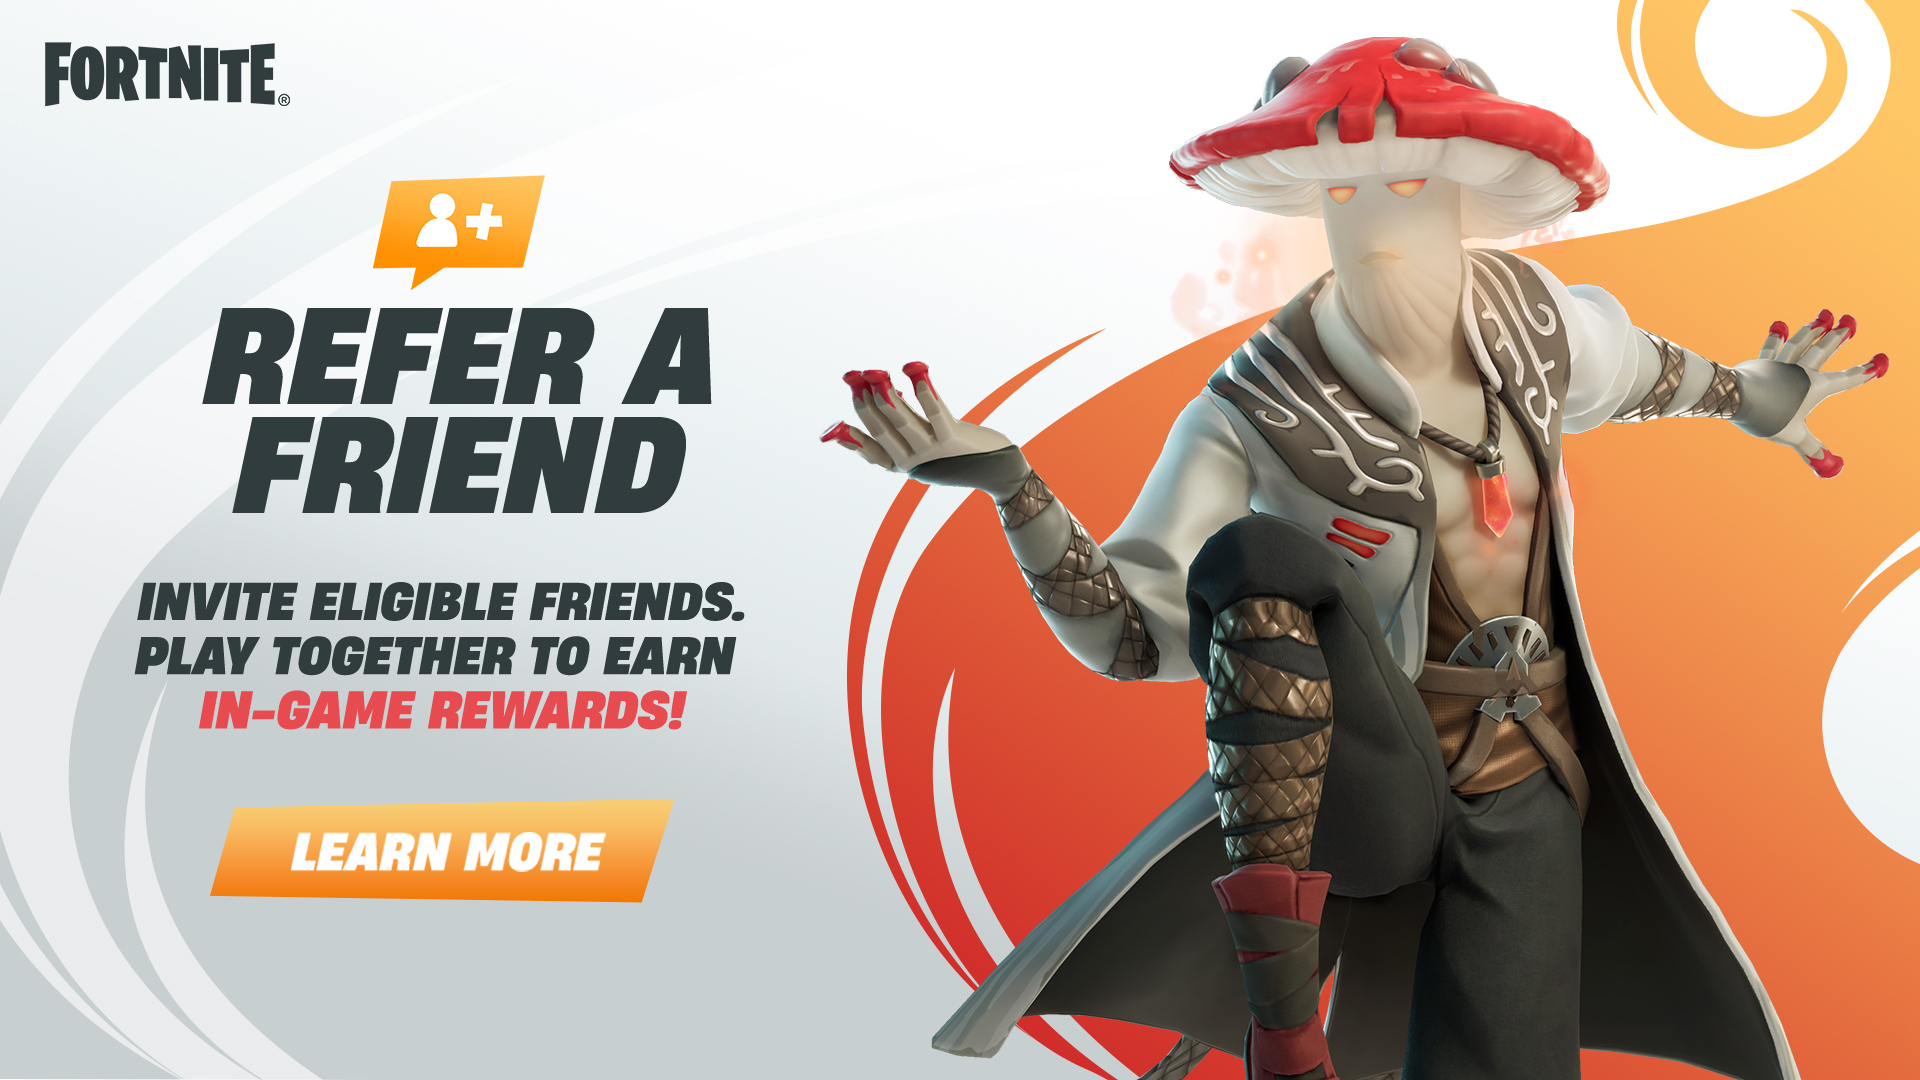 Fortnite Refer A Friend returns, free Redcap Outfit available now